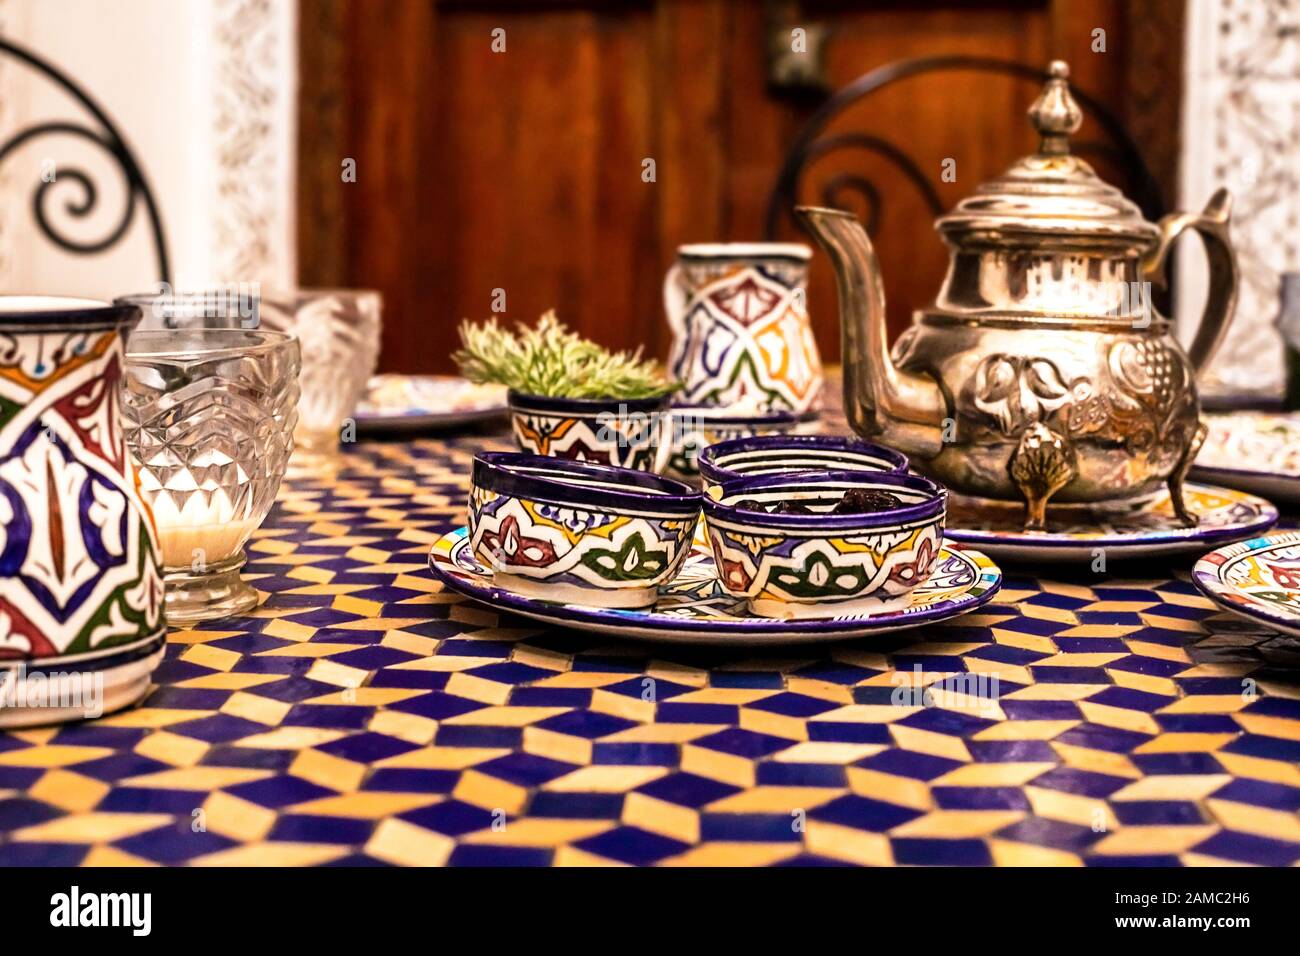 Typical, traditional Moroccan breakfast in a typical Maracan house. Tasty Moroccan style breakfast. Fes, Morocco Stock Photo